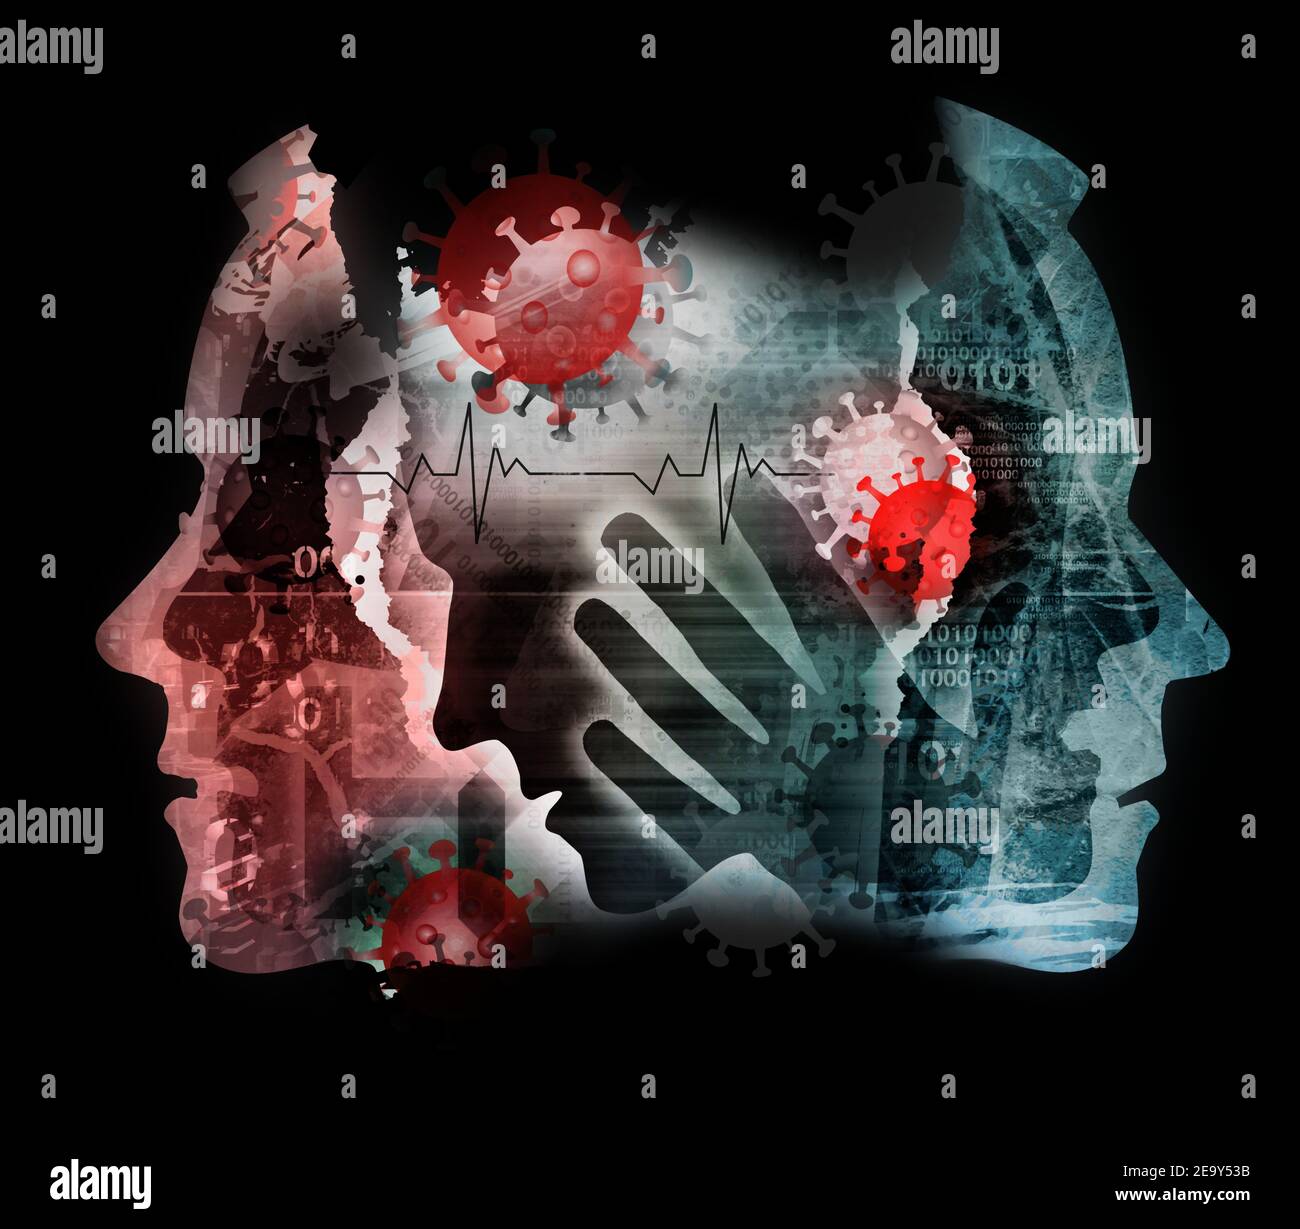 Pandemic of coronavirus, human suffering and pain, patients and victims.Male heads, grunge expressive composition of stylized heads silhouettes. Stock Photo